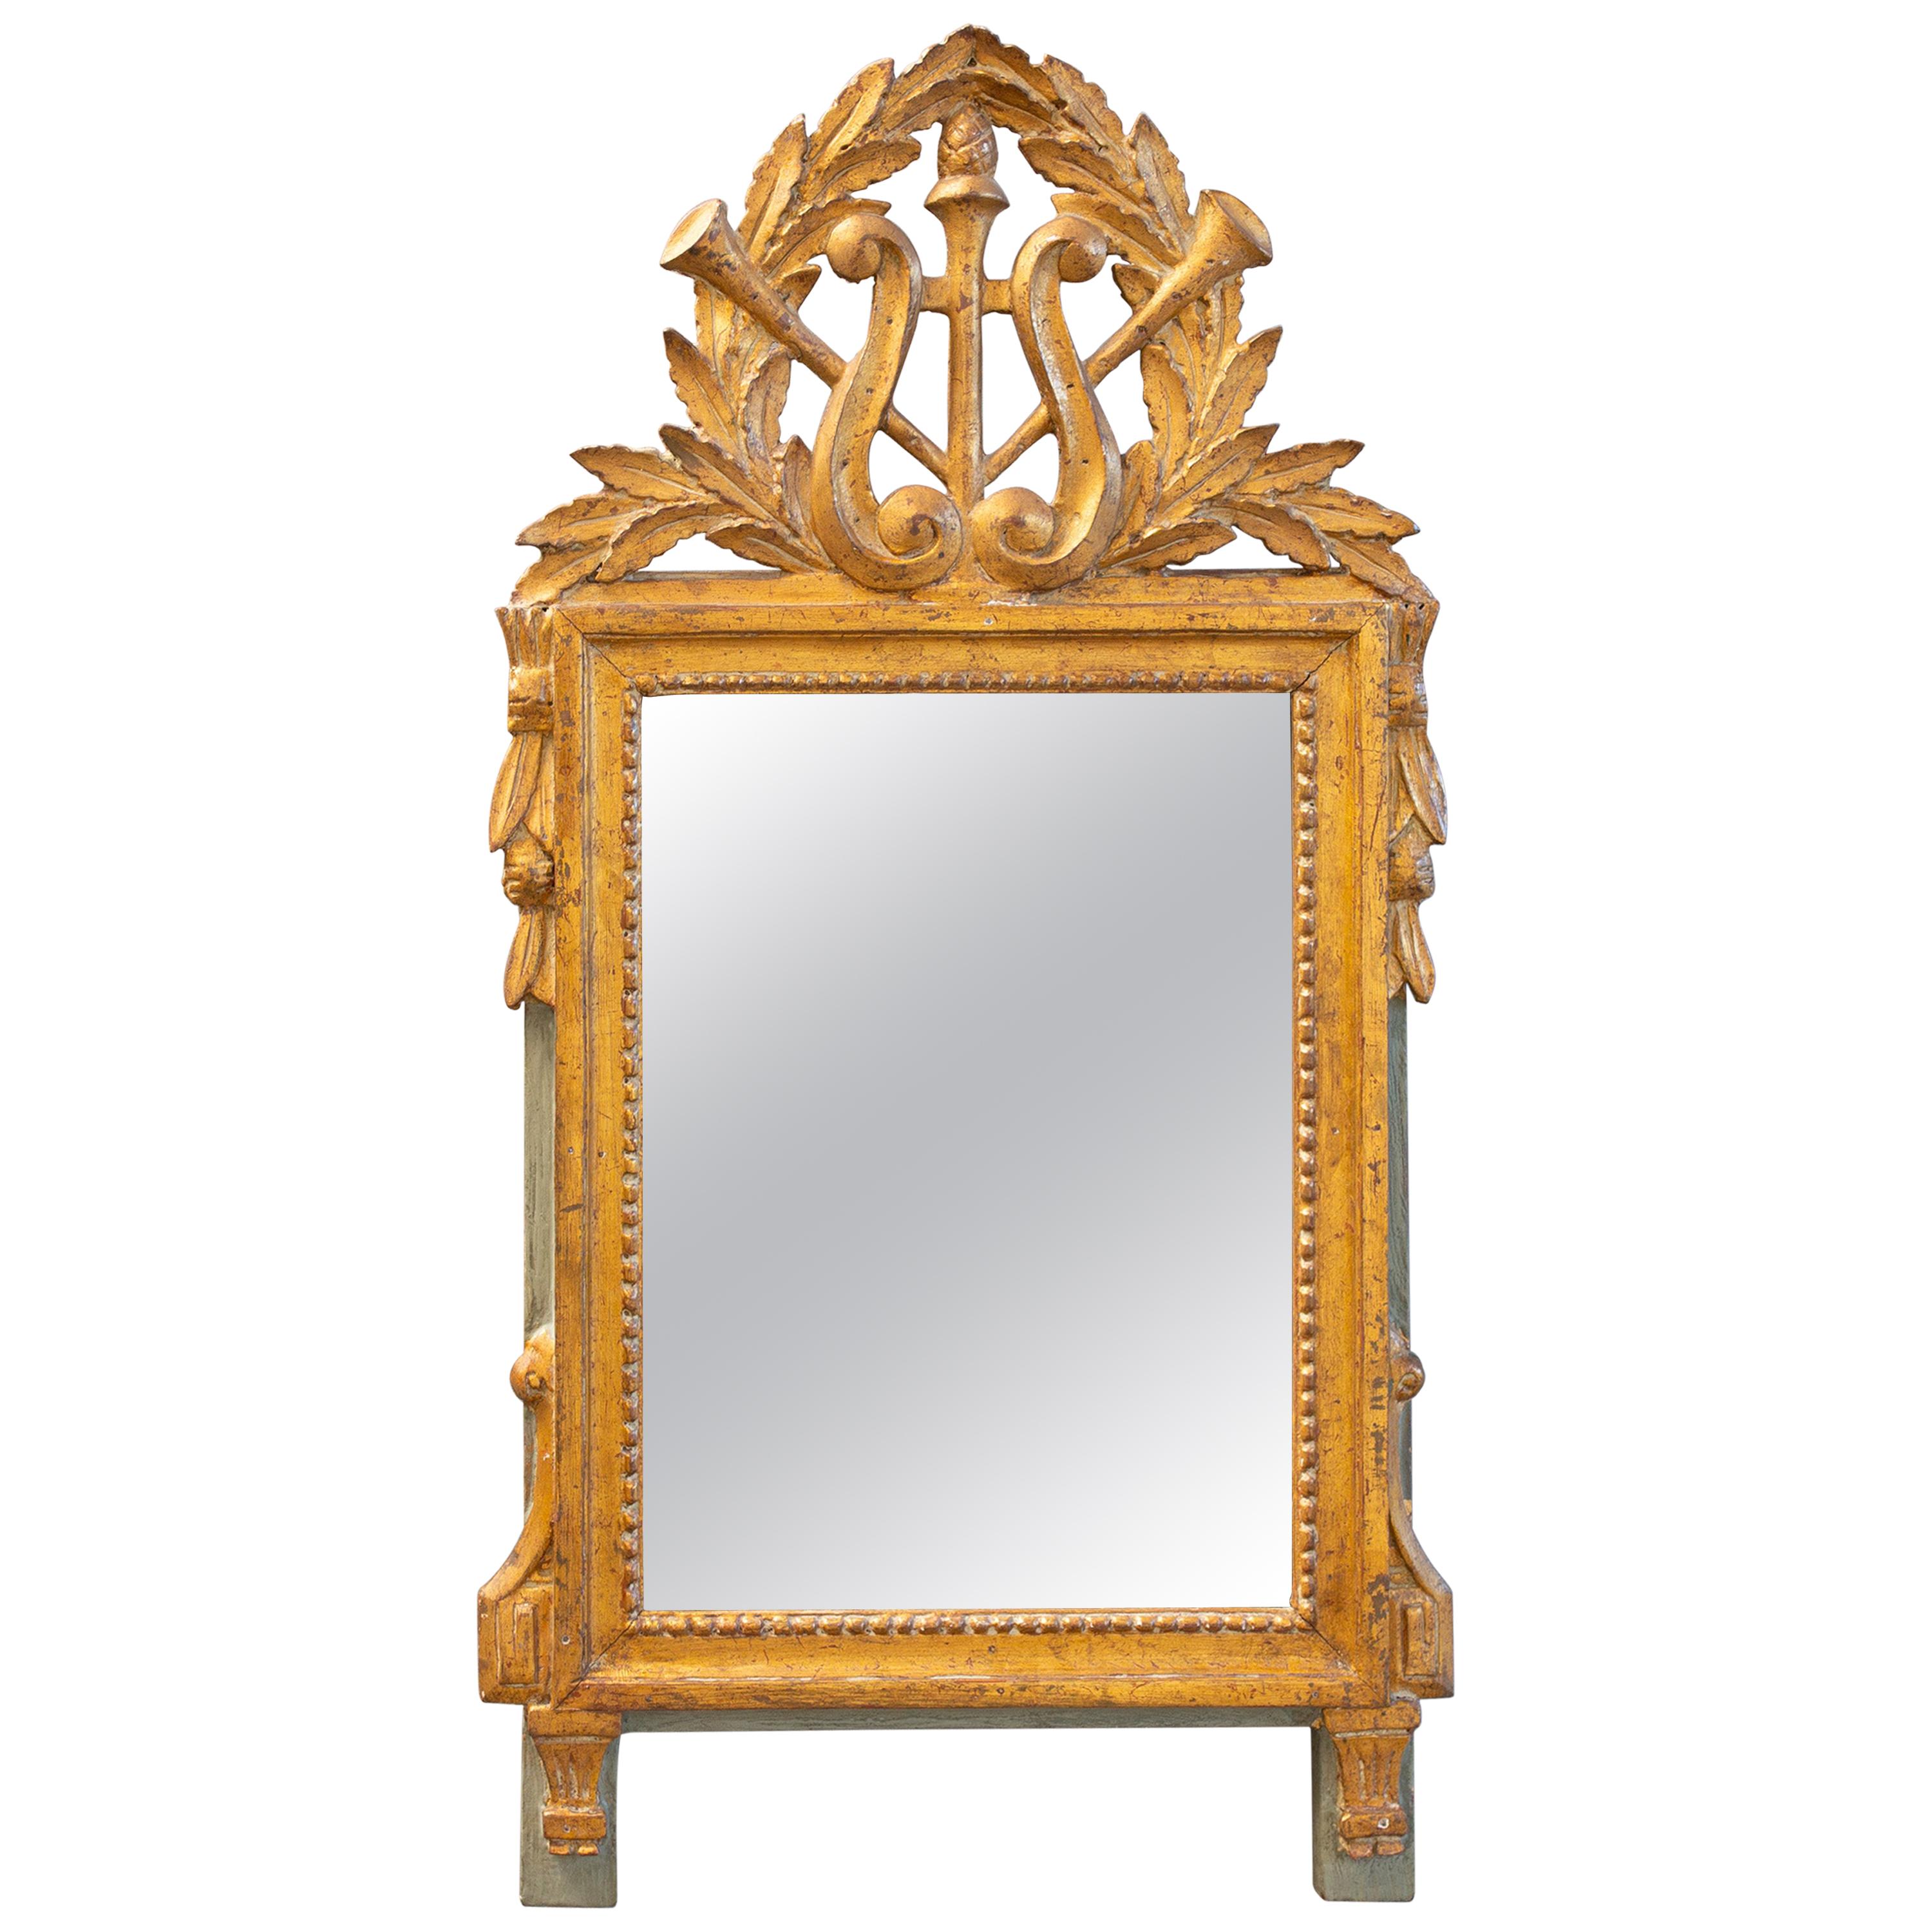 Late 18th Century Gilded French Mirror